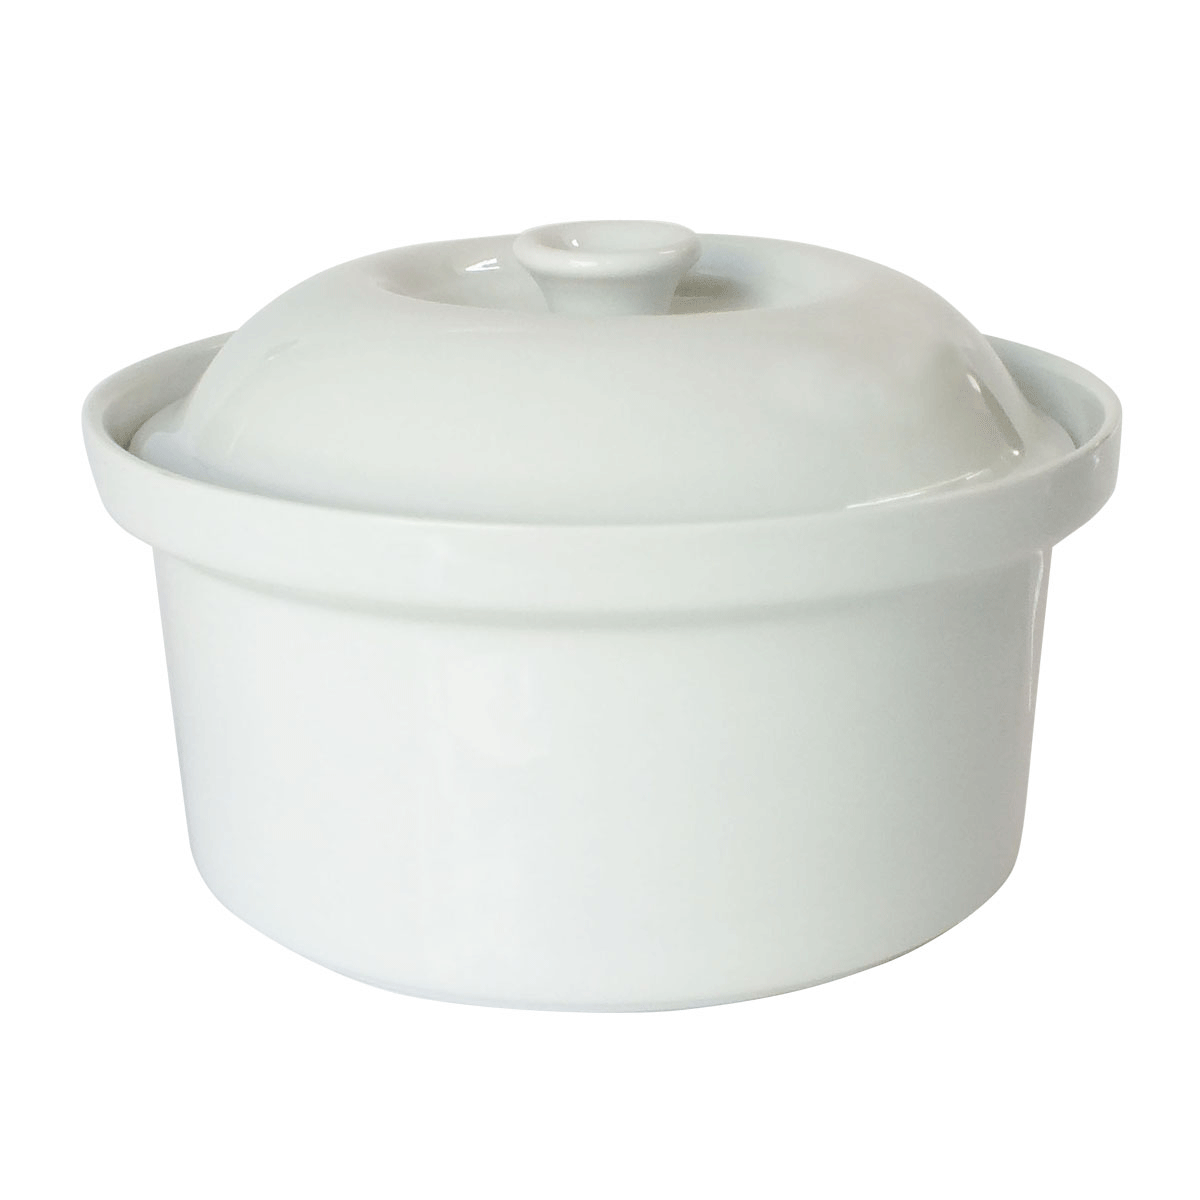 Round Vegetable Dish & Lid | AB Event Hire